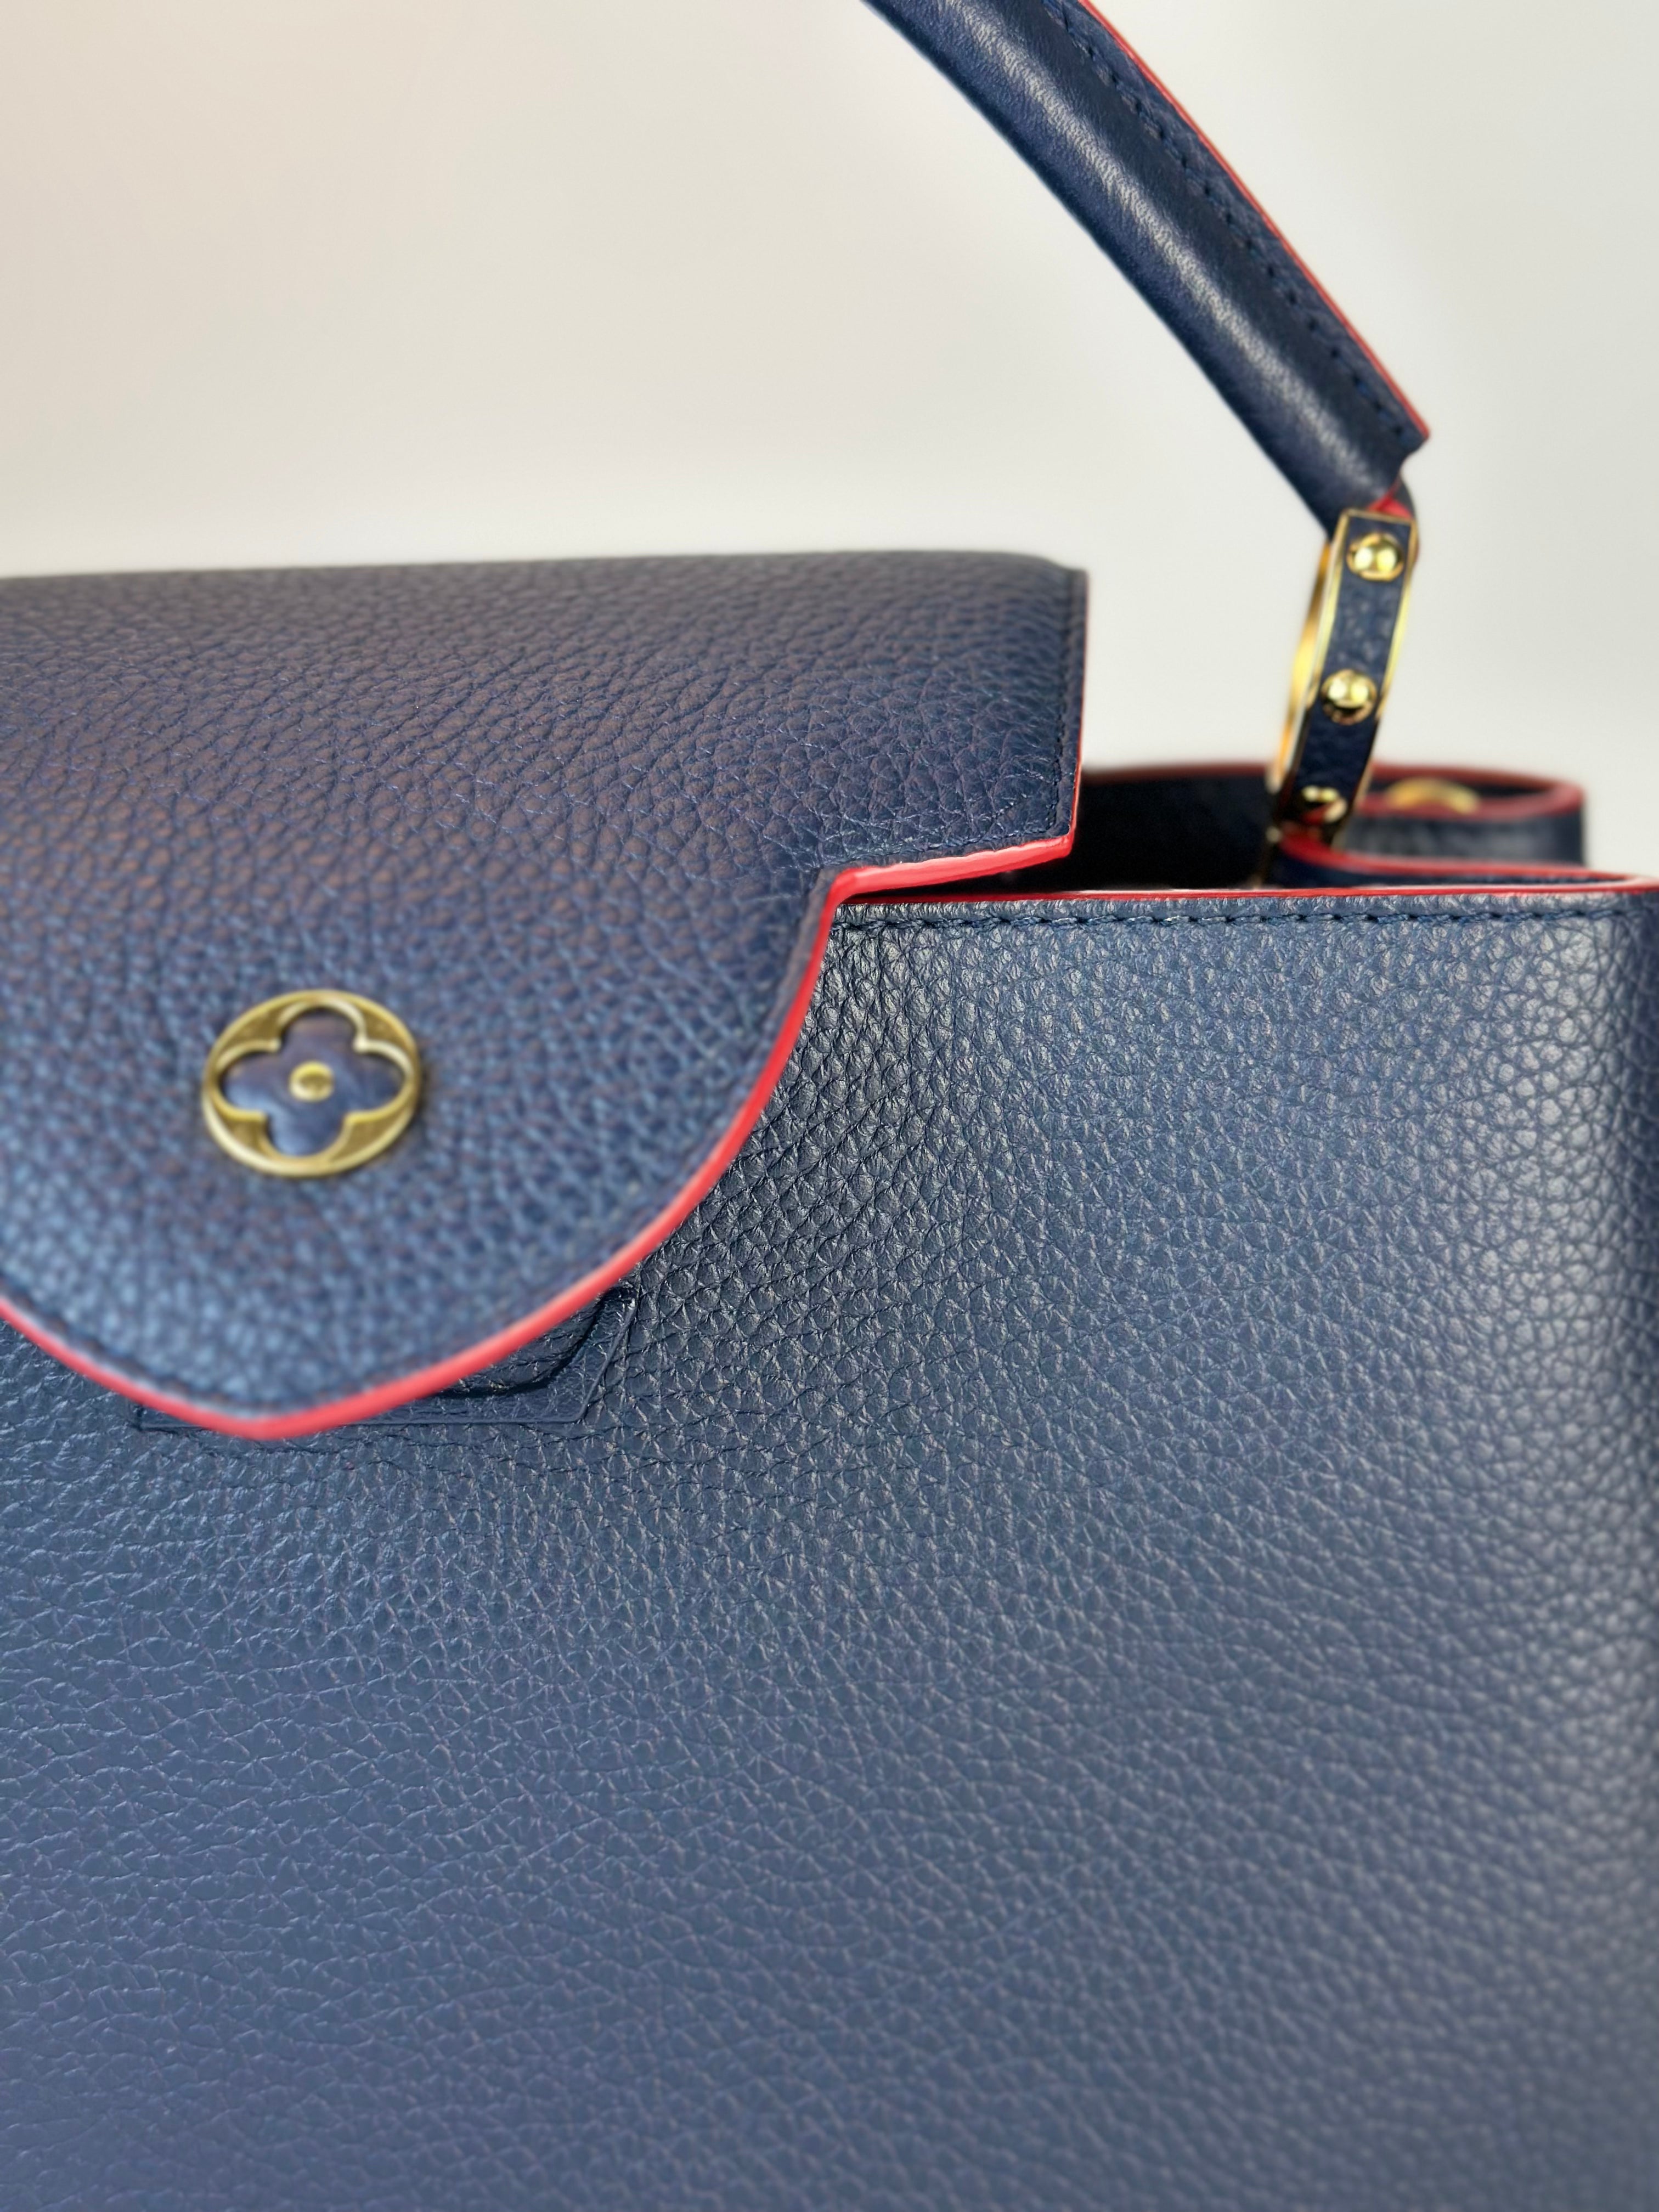 navy blue and red louis vuittons handbags